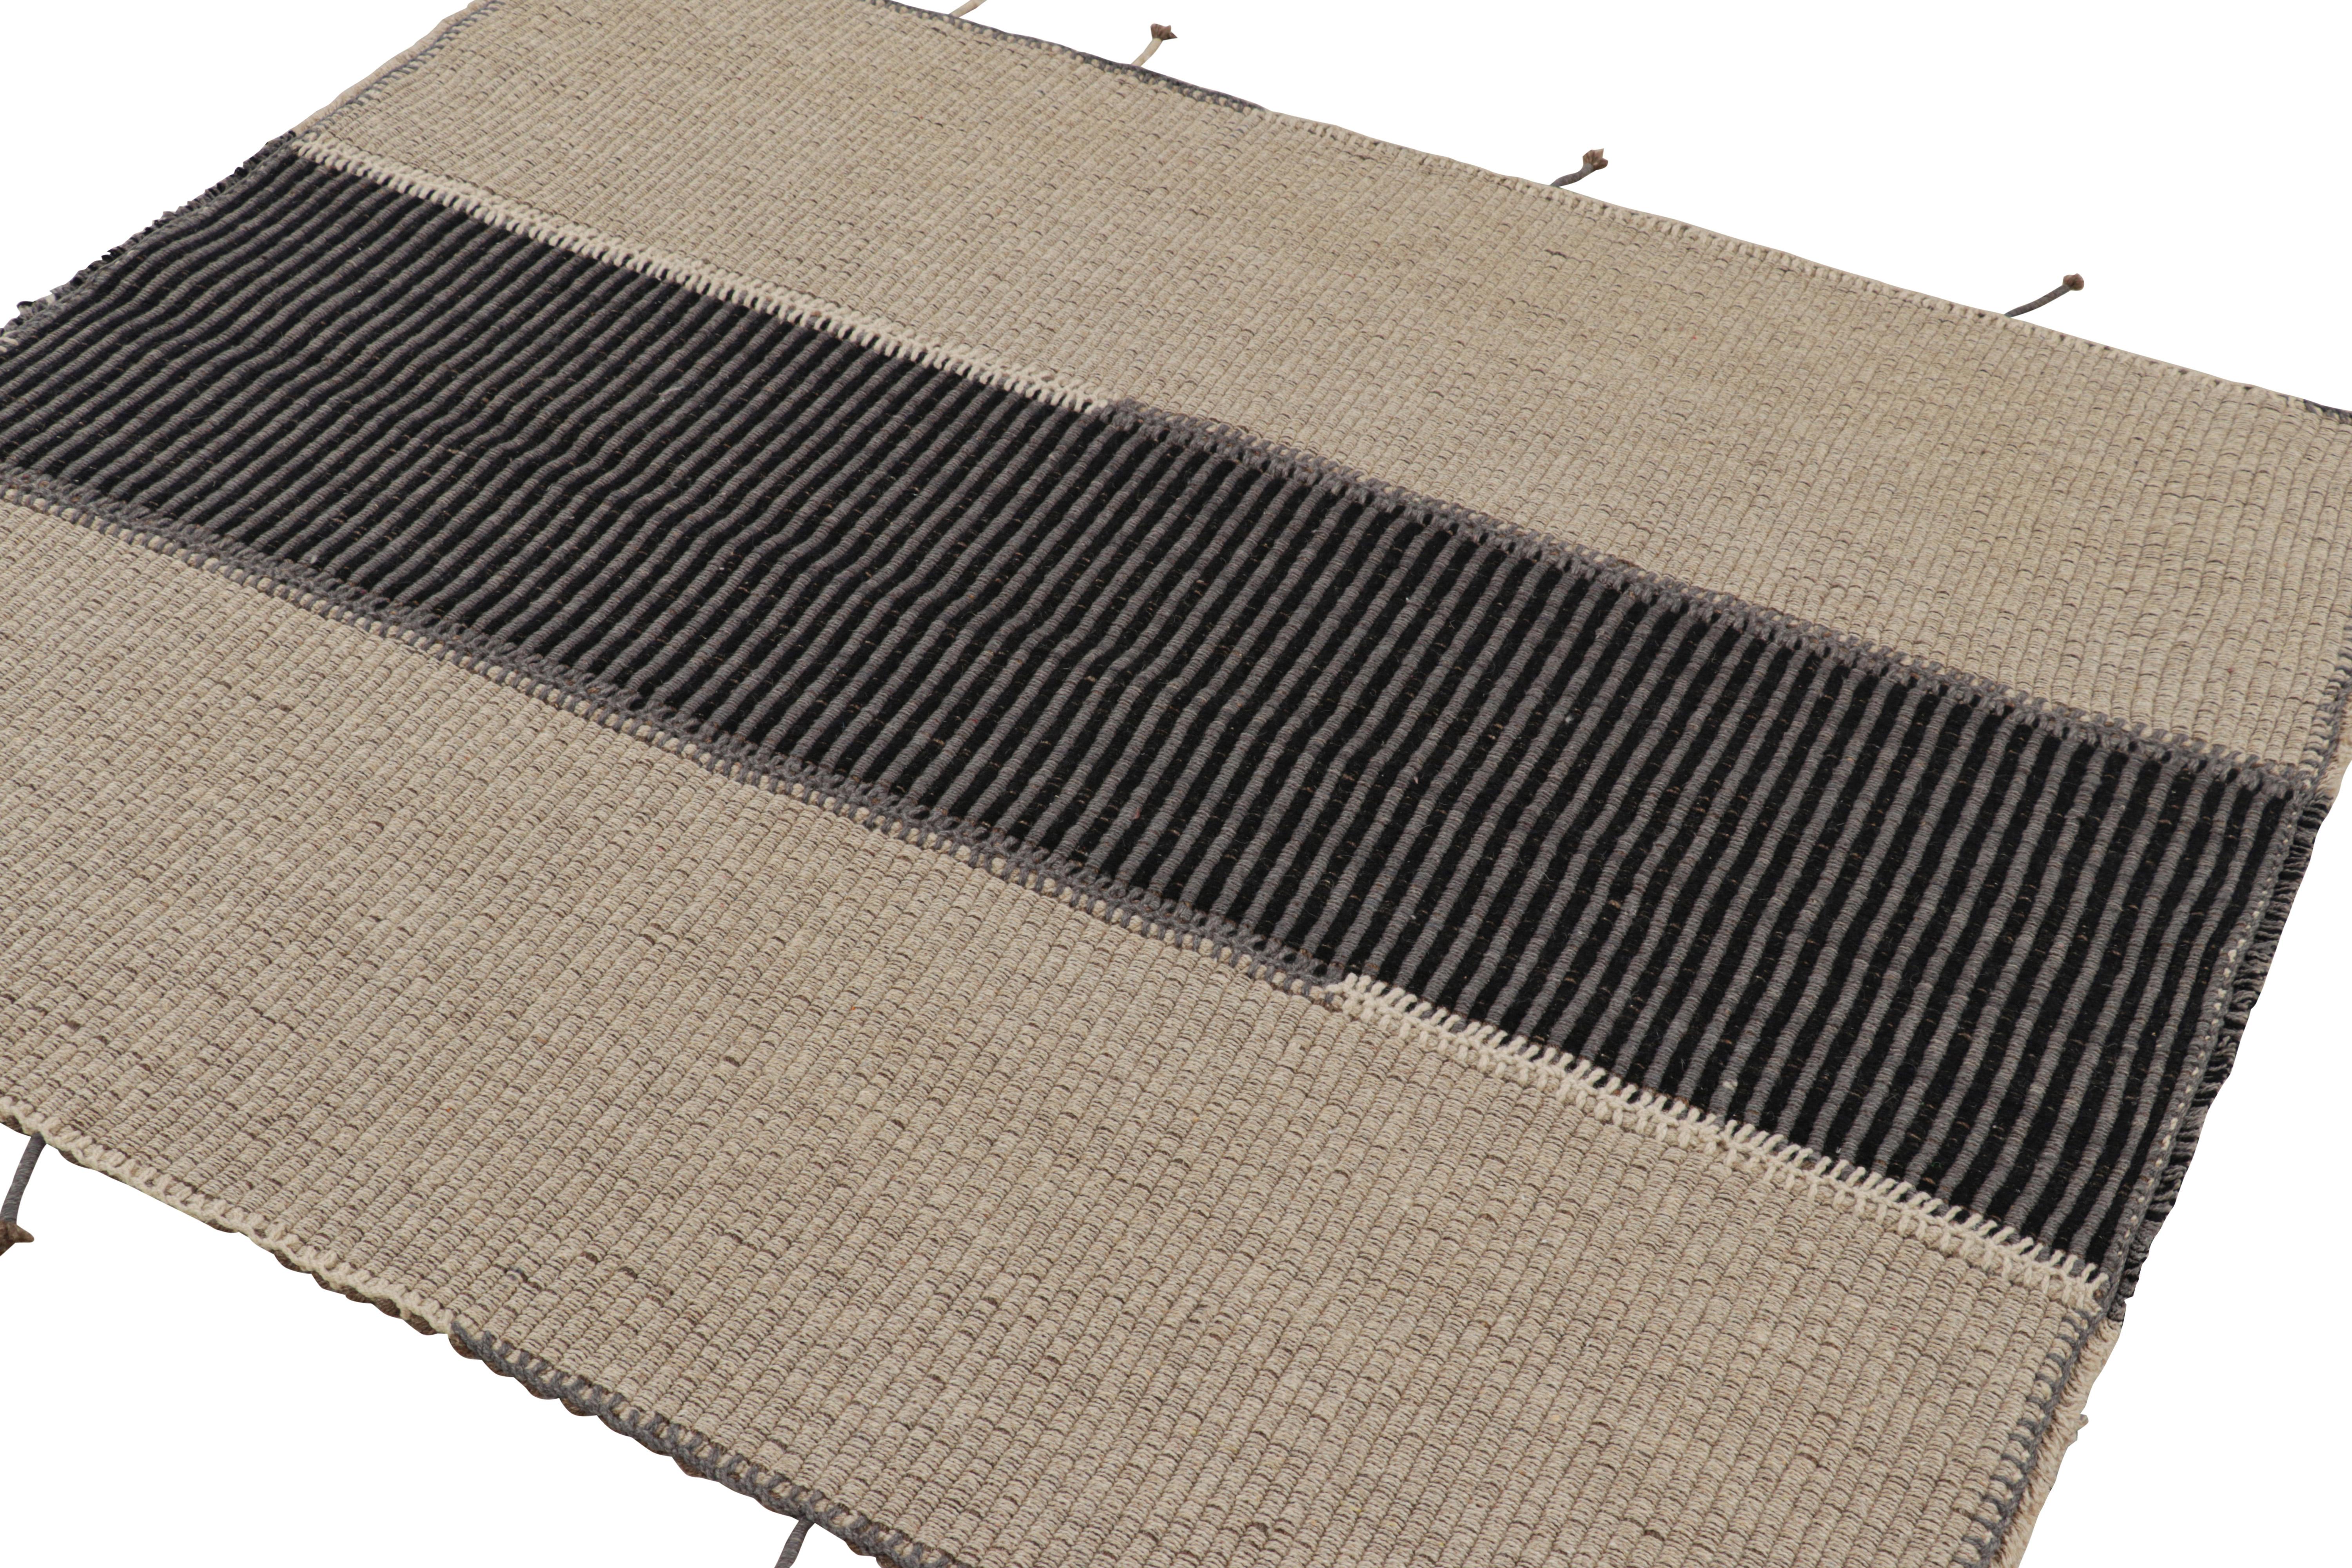 Afghan Rug & Kilim’s Contemporary Kilim in Beige and Black Textural Stripes For Sale